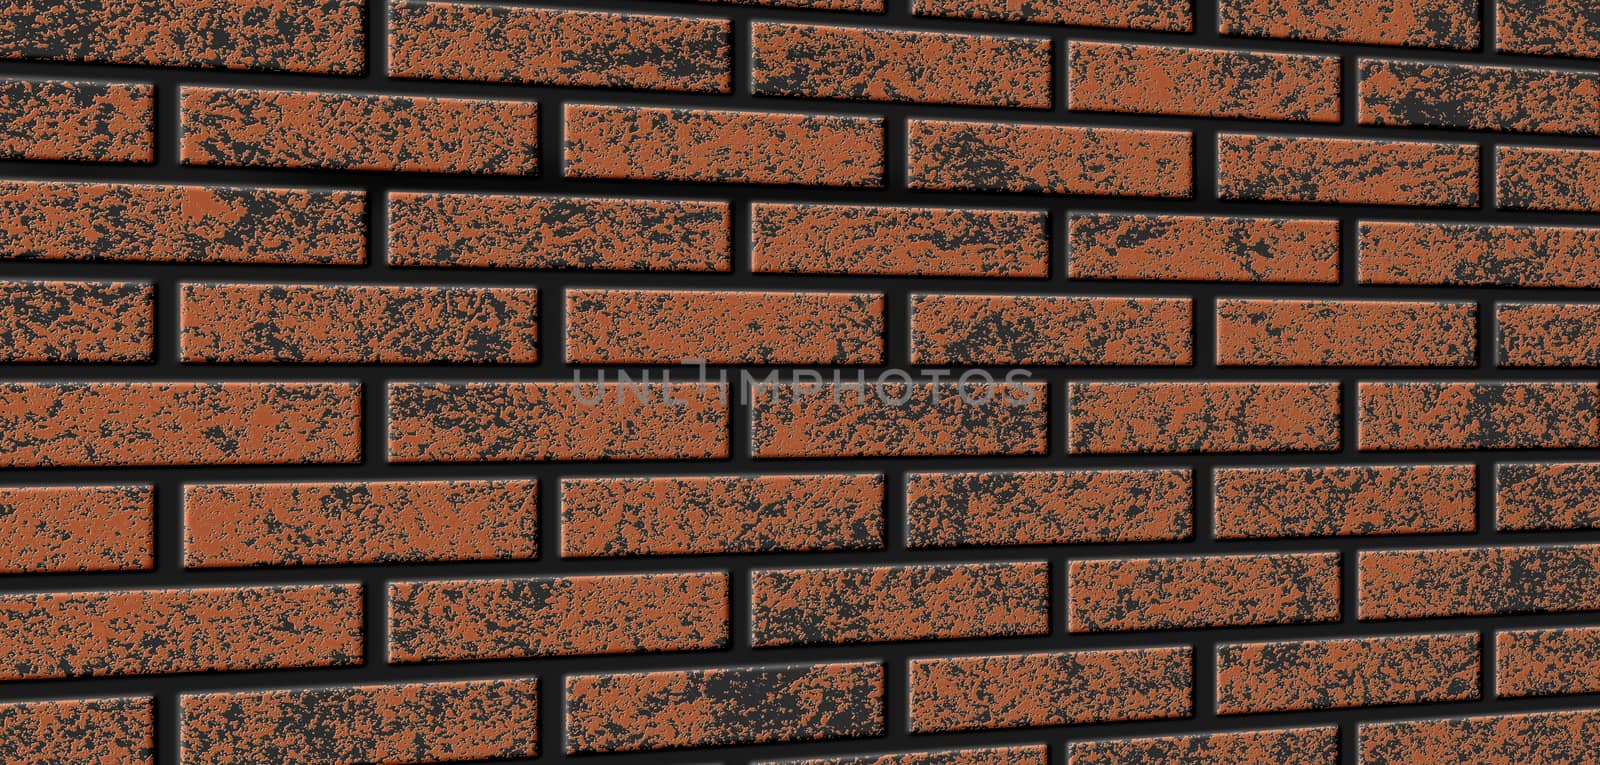 Brick wall illustration by Visual-Content